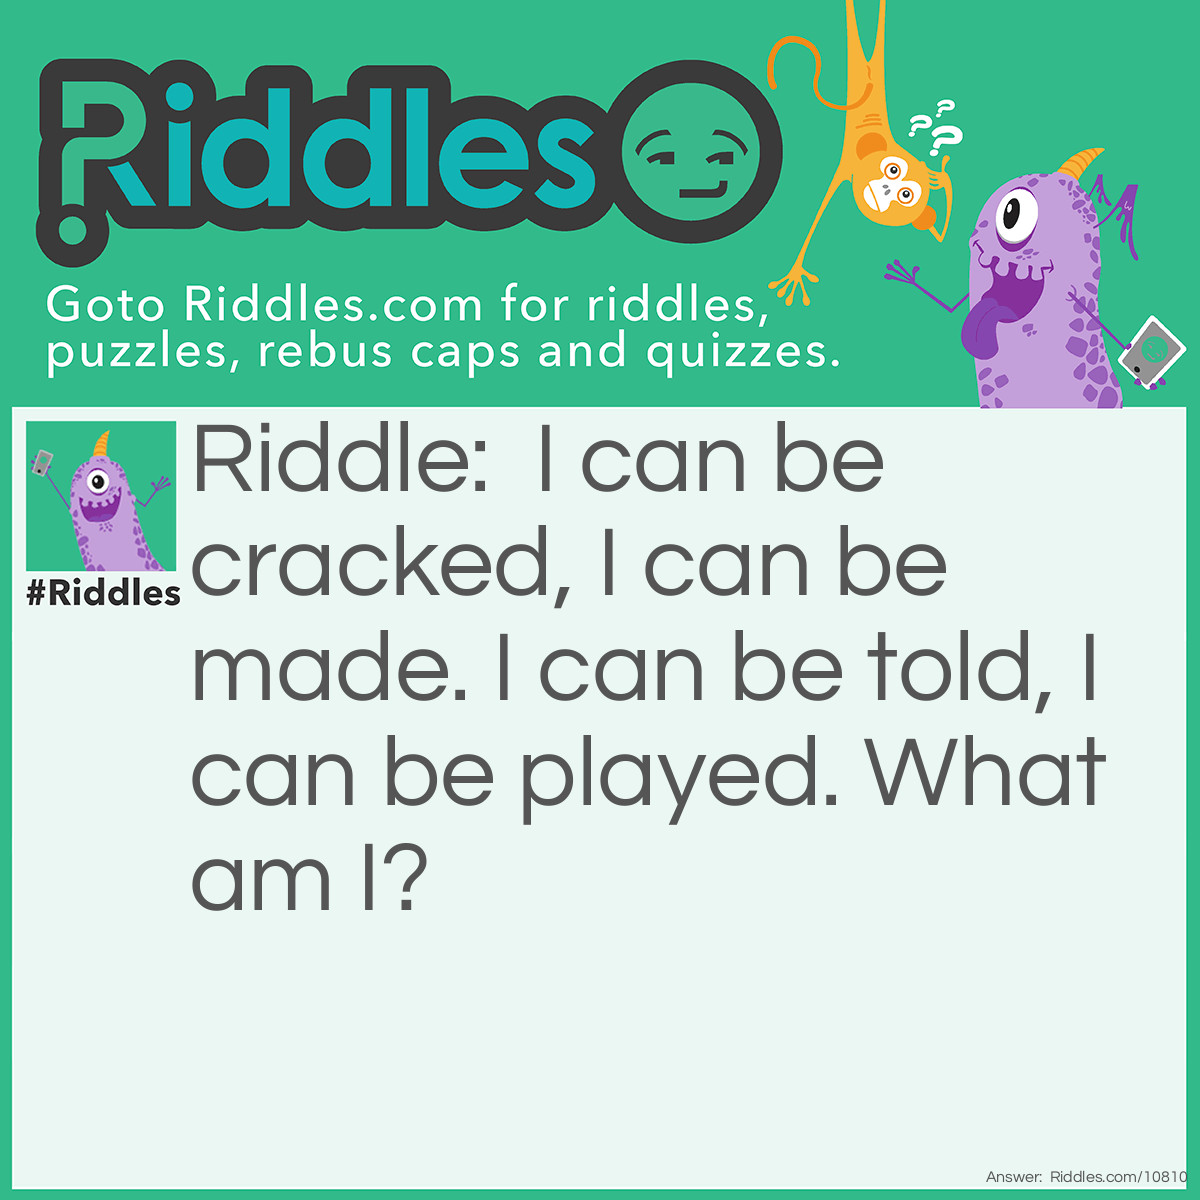 Riddle: I can be cracked, I can be made. I can be told, I can be played. What am I? Answer: A joke.